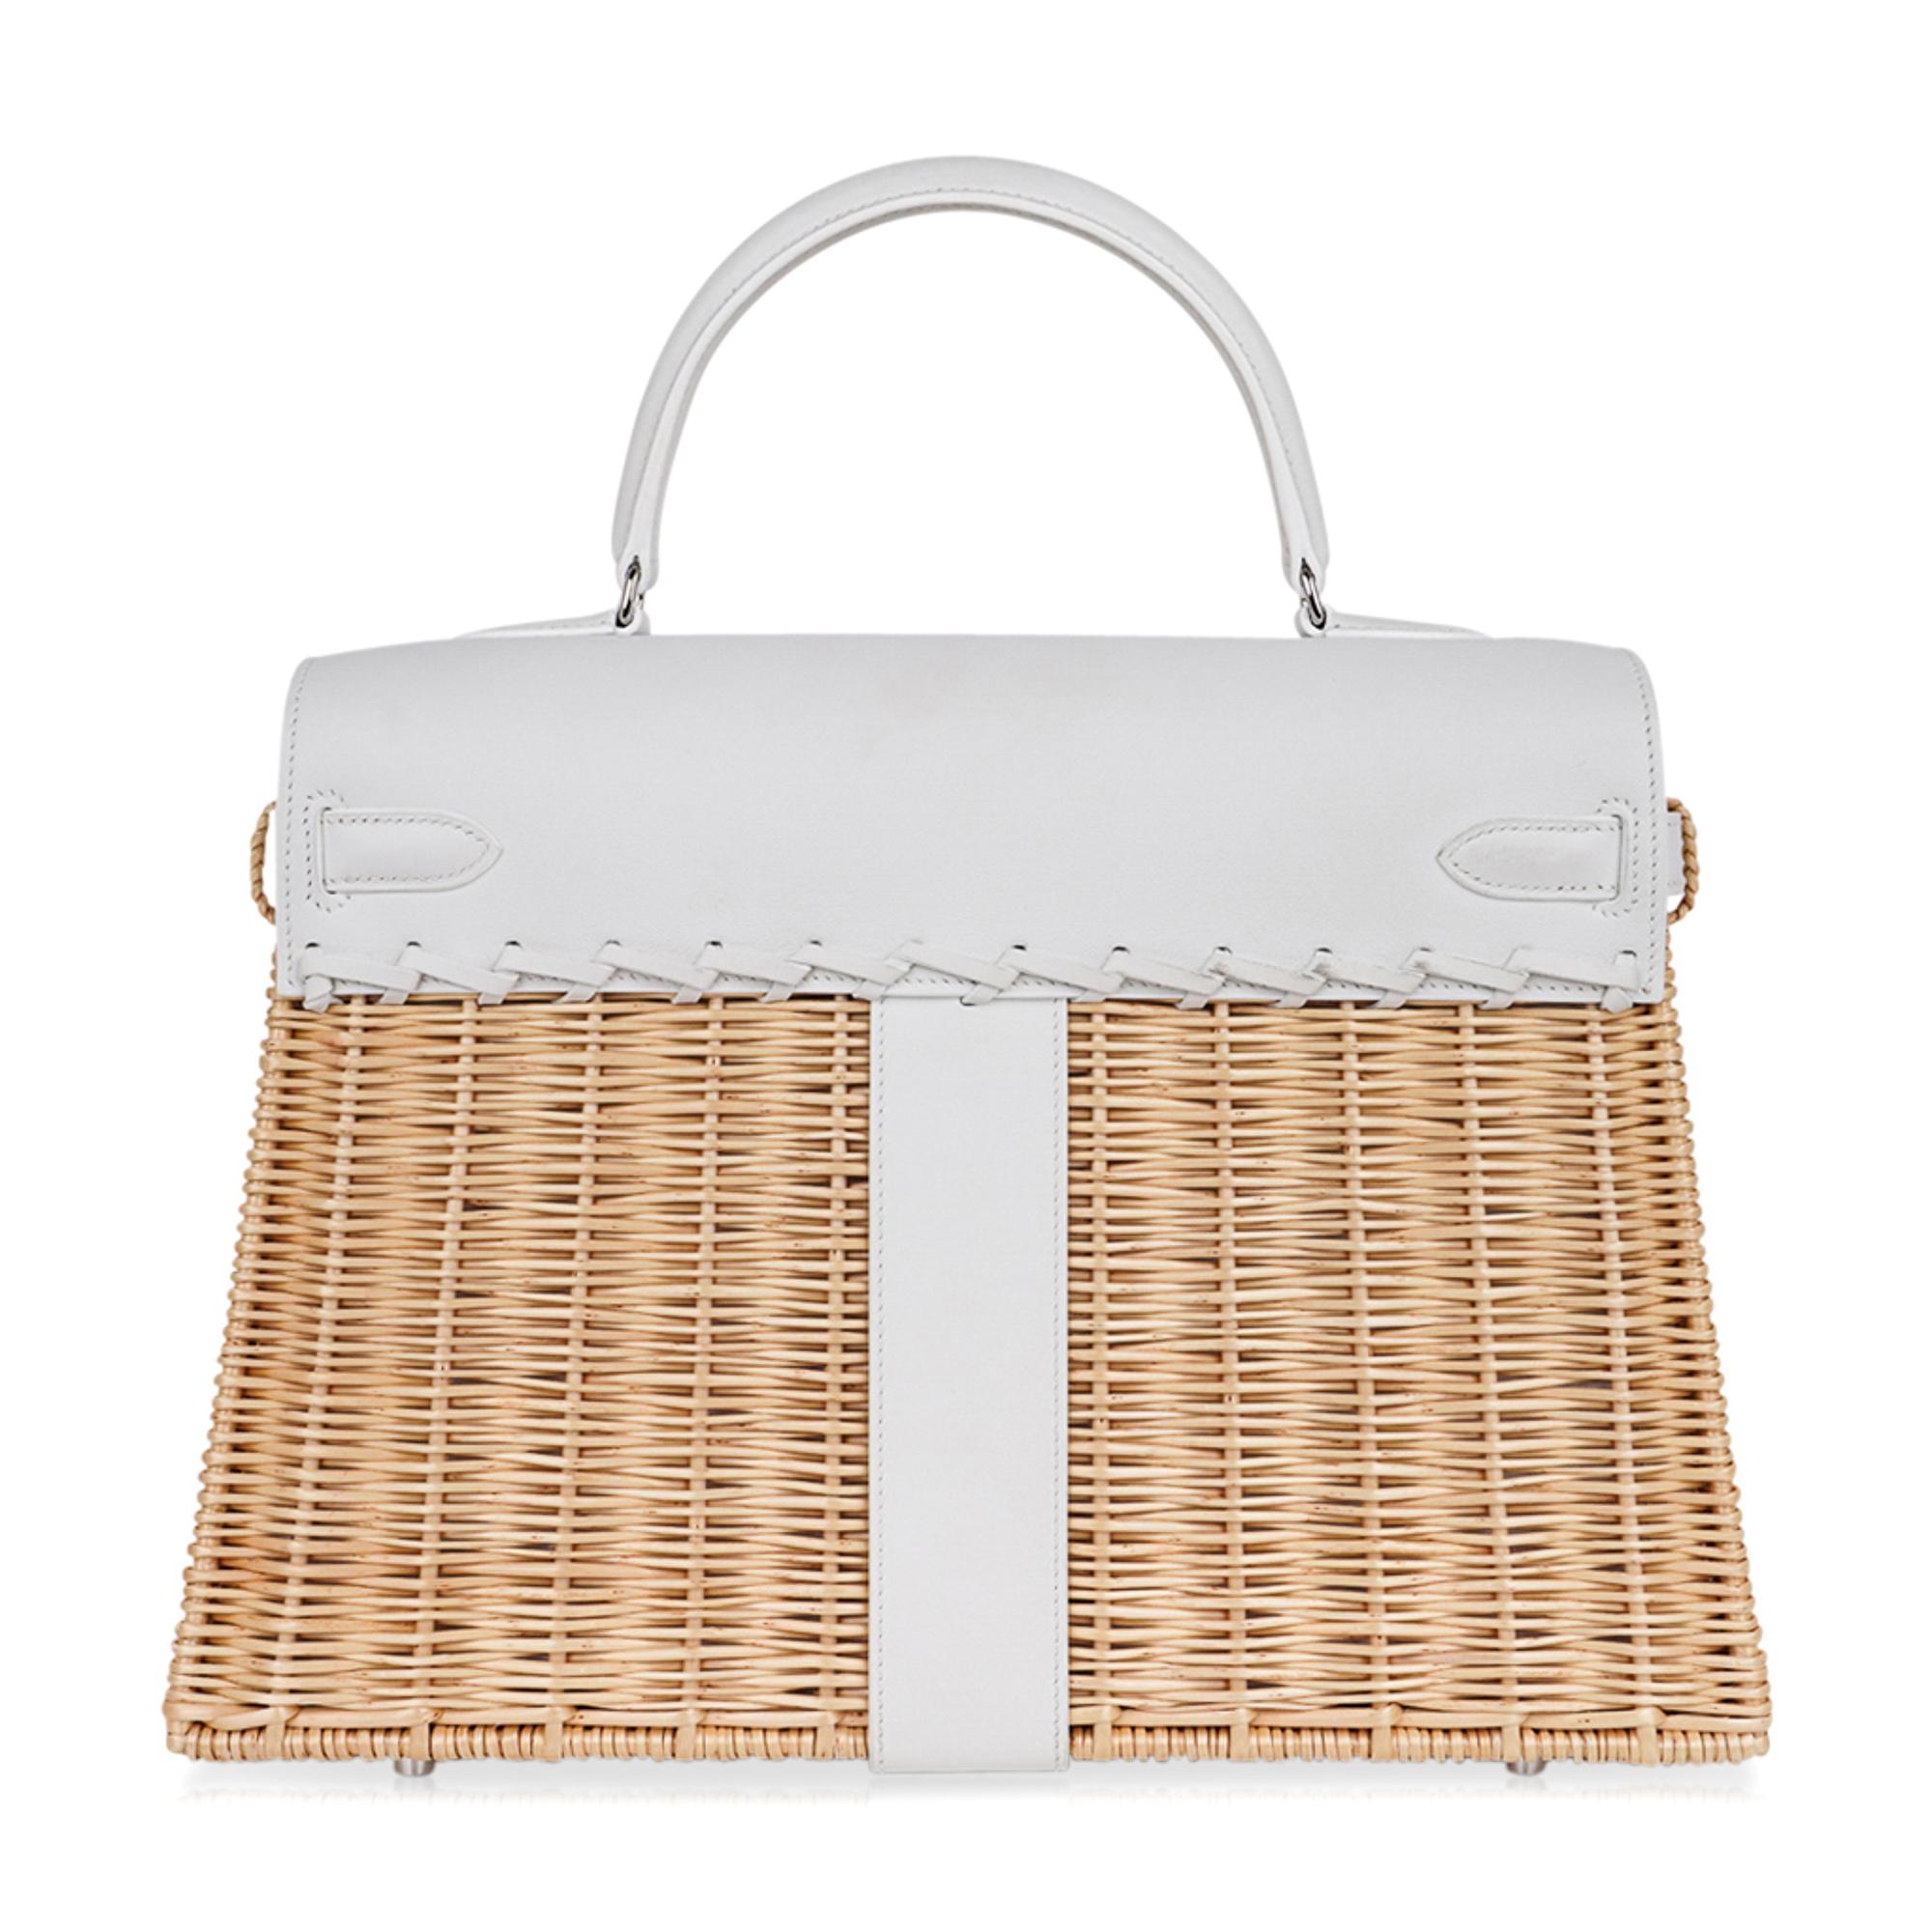 Hermes Kelly Picnic 35 Bag White Swift Leather / Osier (Wicker) Limited Edition 5